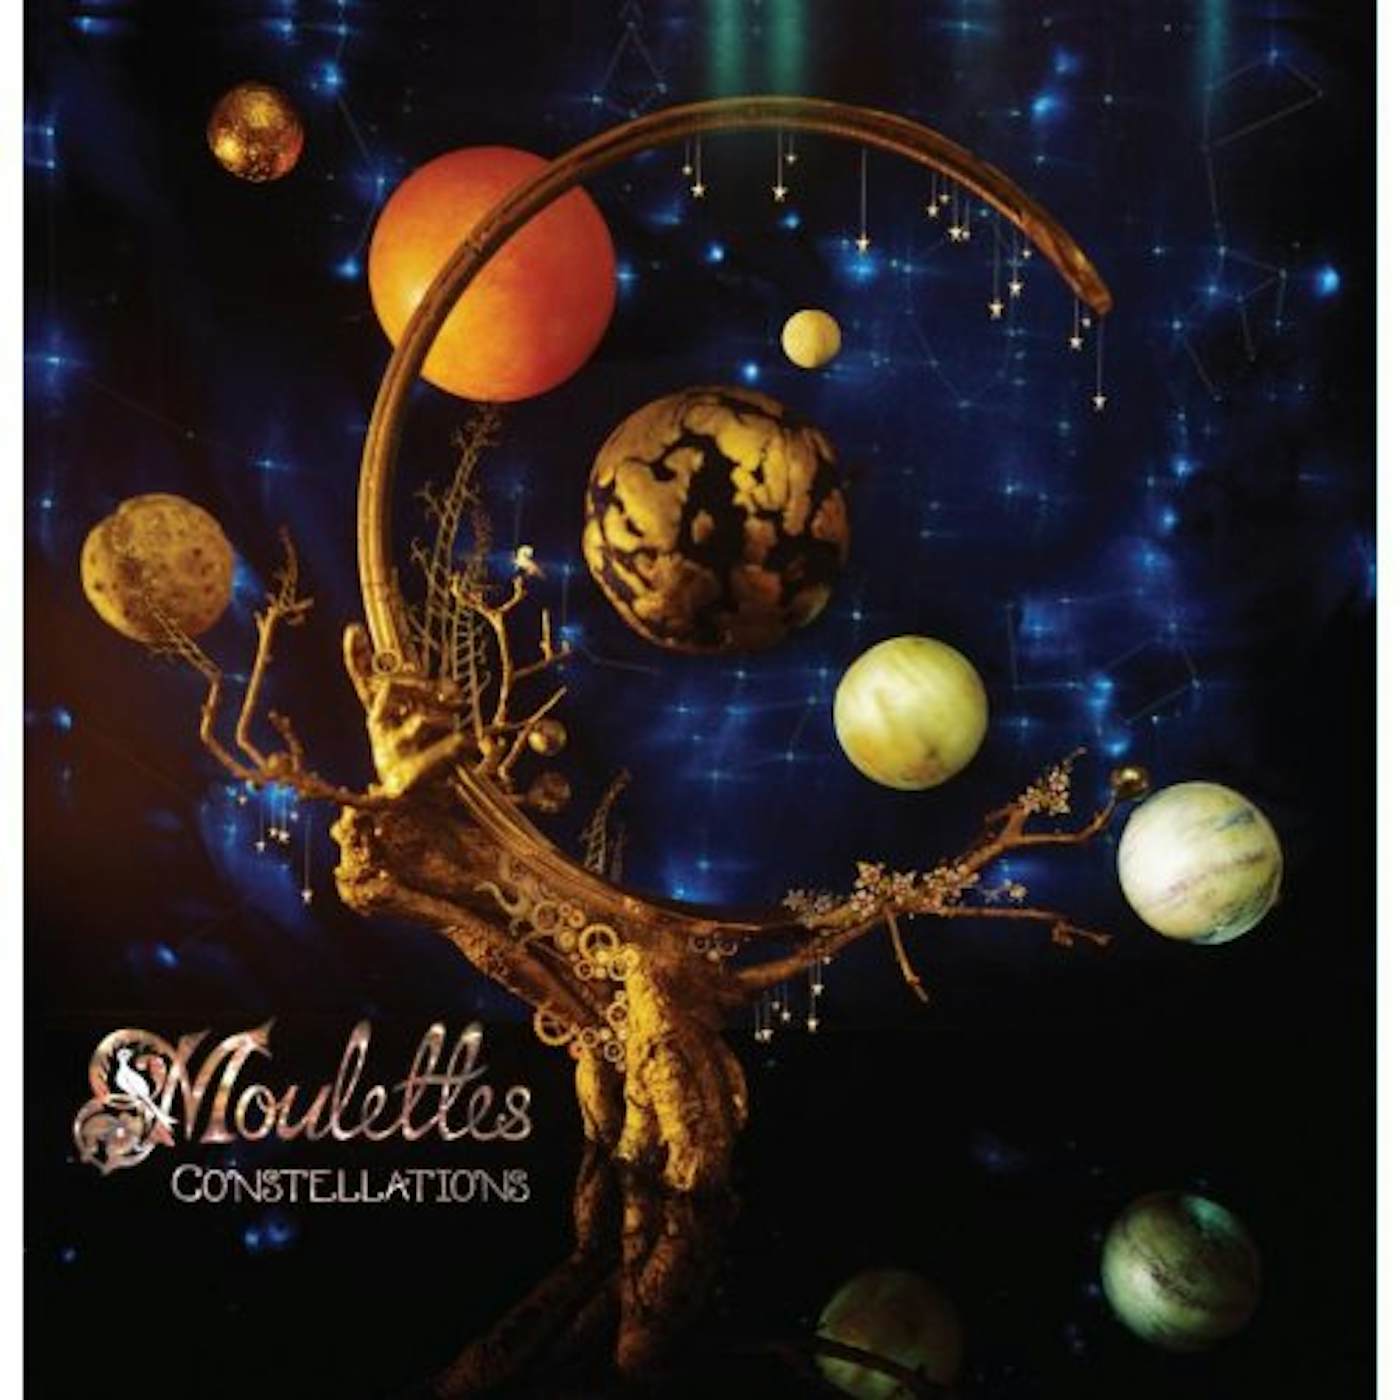 Moulettes Constellations Vinyl Record